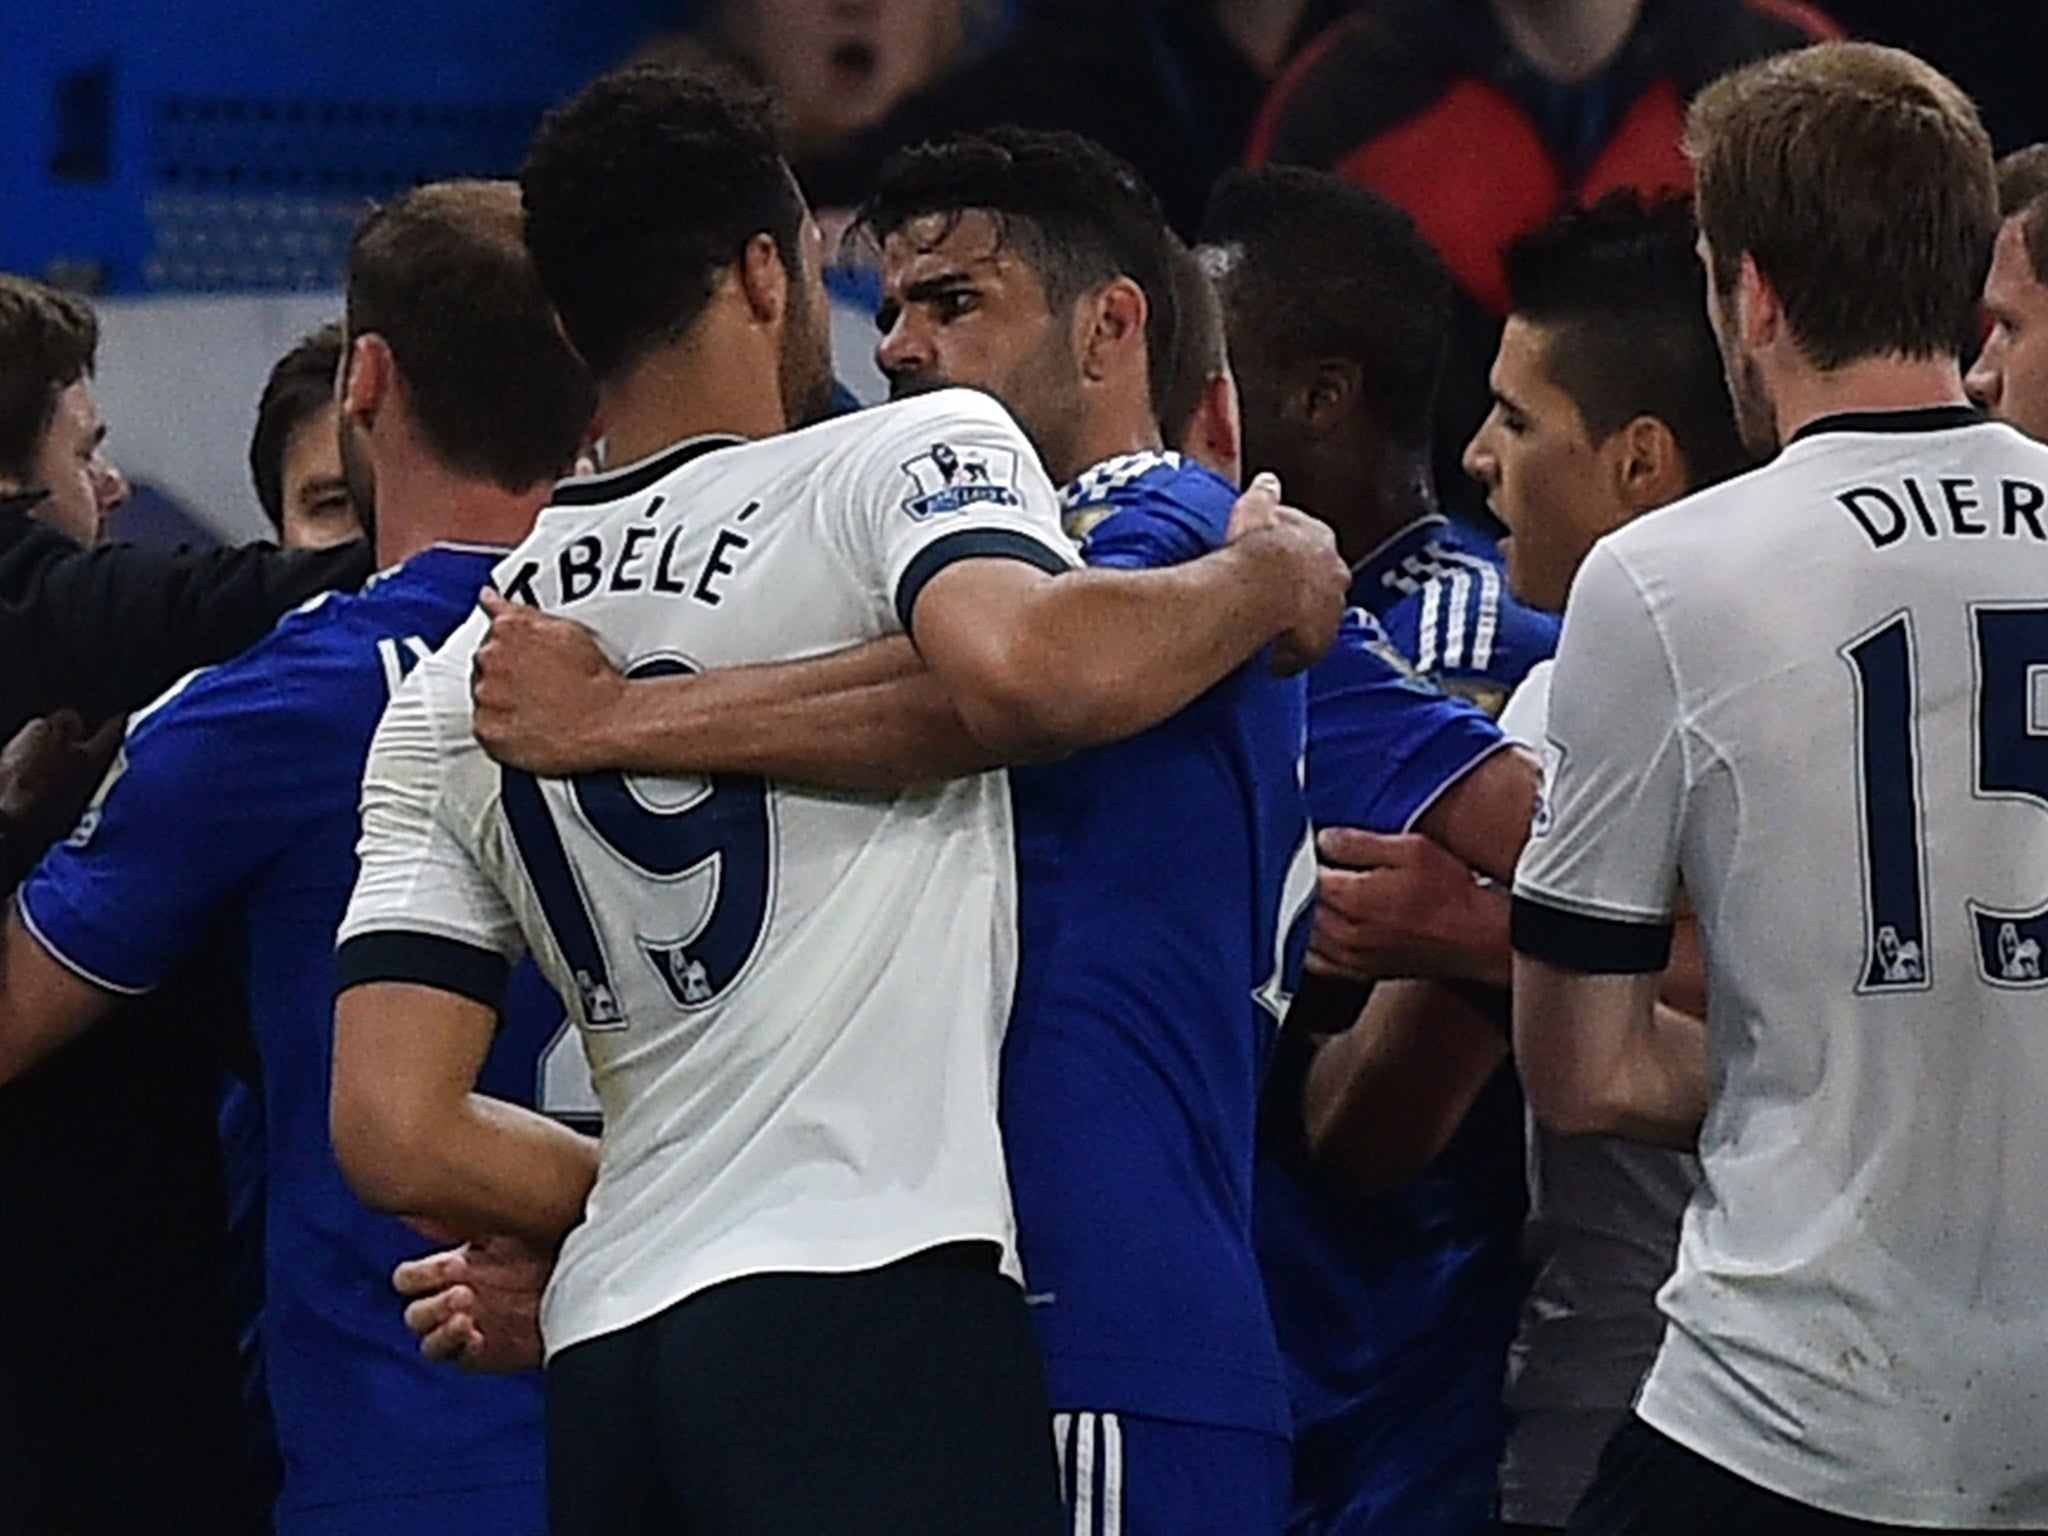 Mousa Dembele and Diego Costa square up at Stamford Bridge during a bad-tempered London derby last Monday